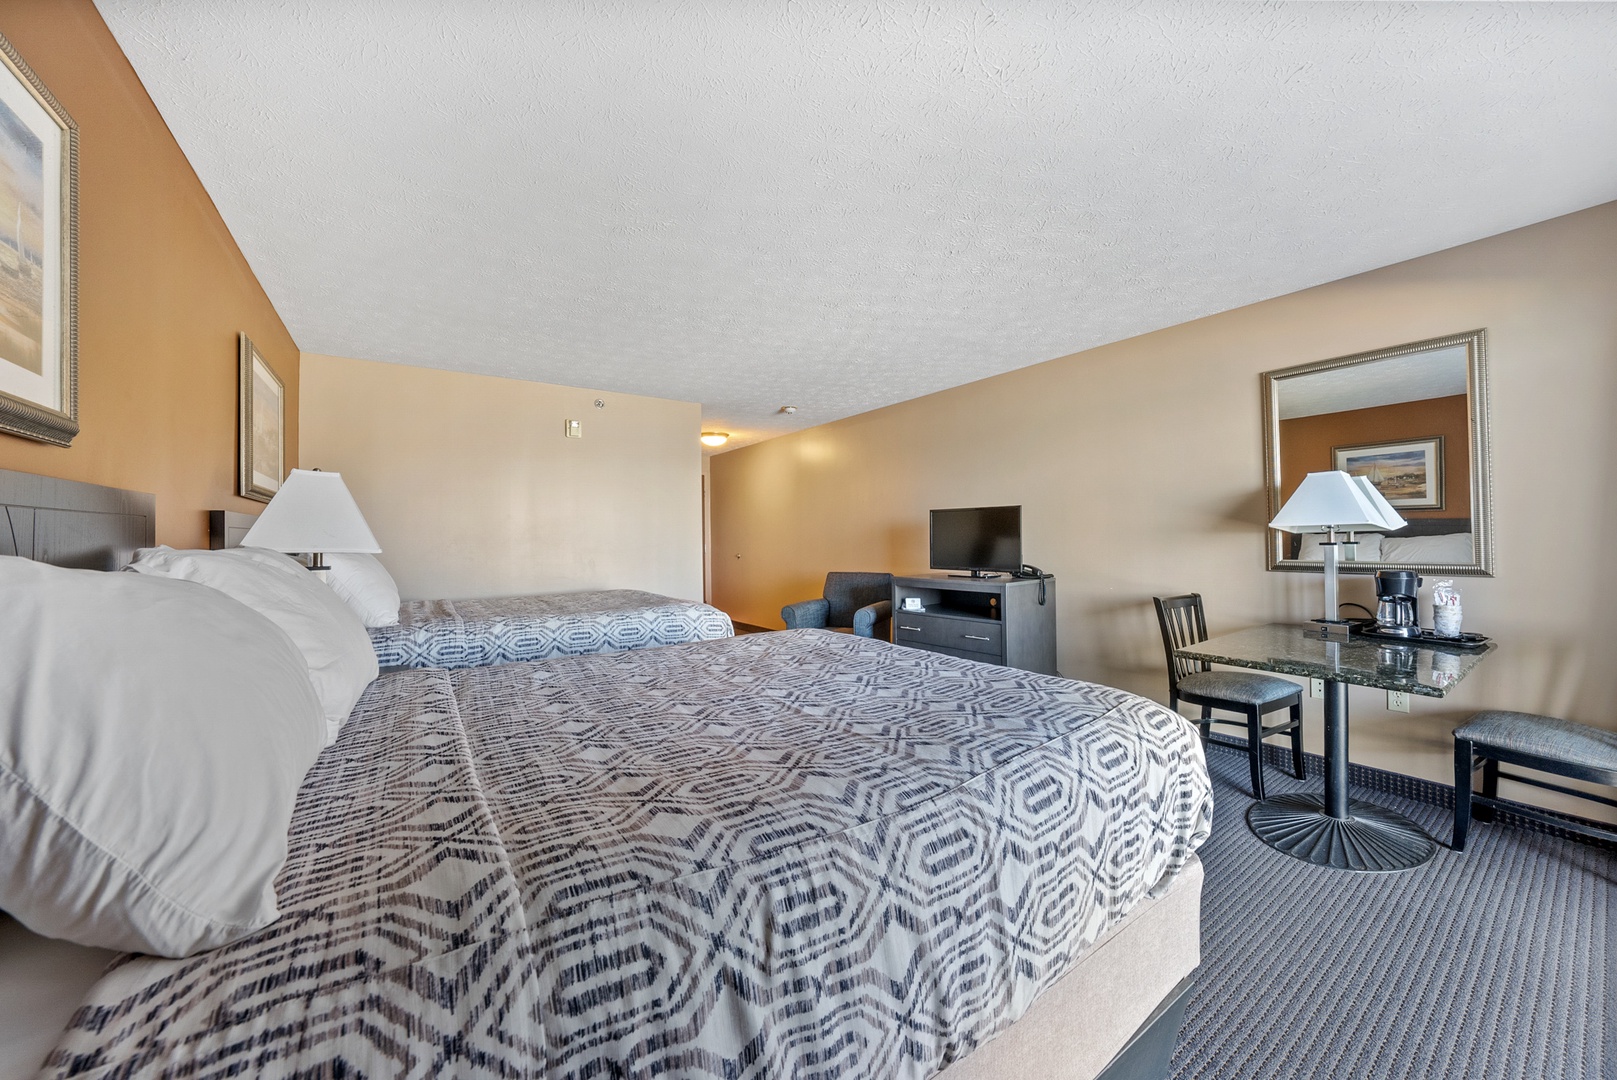 Unwind in Spacious Comfort with Our Double Queen Room